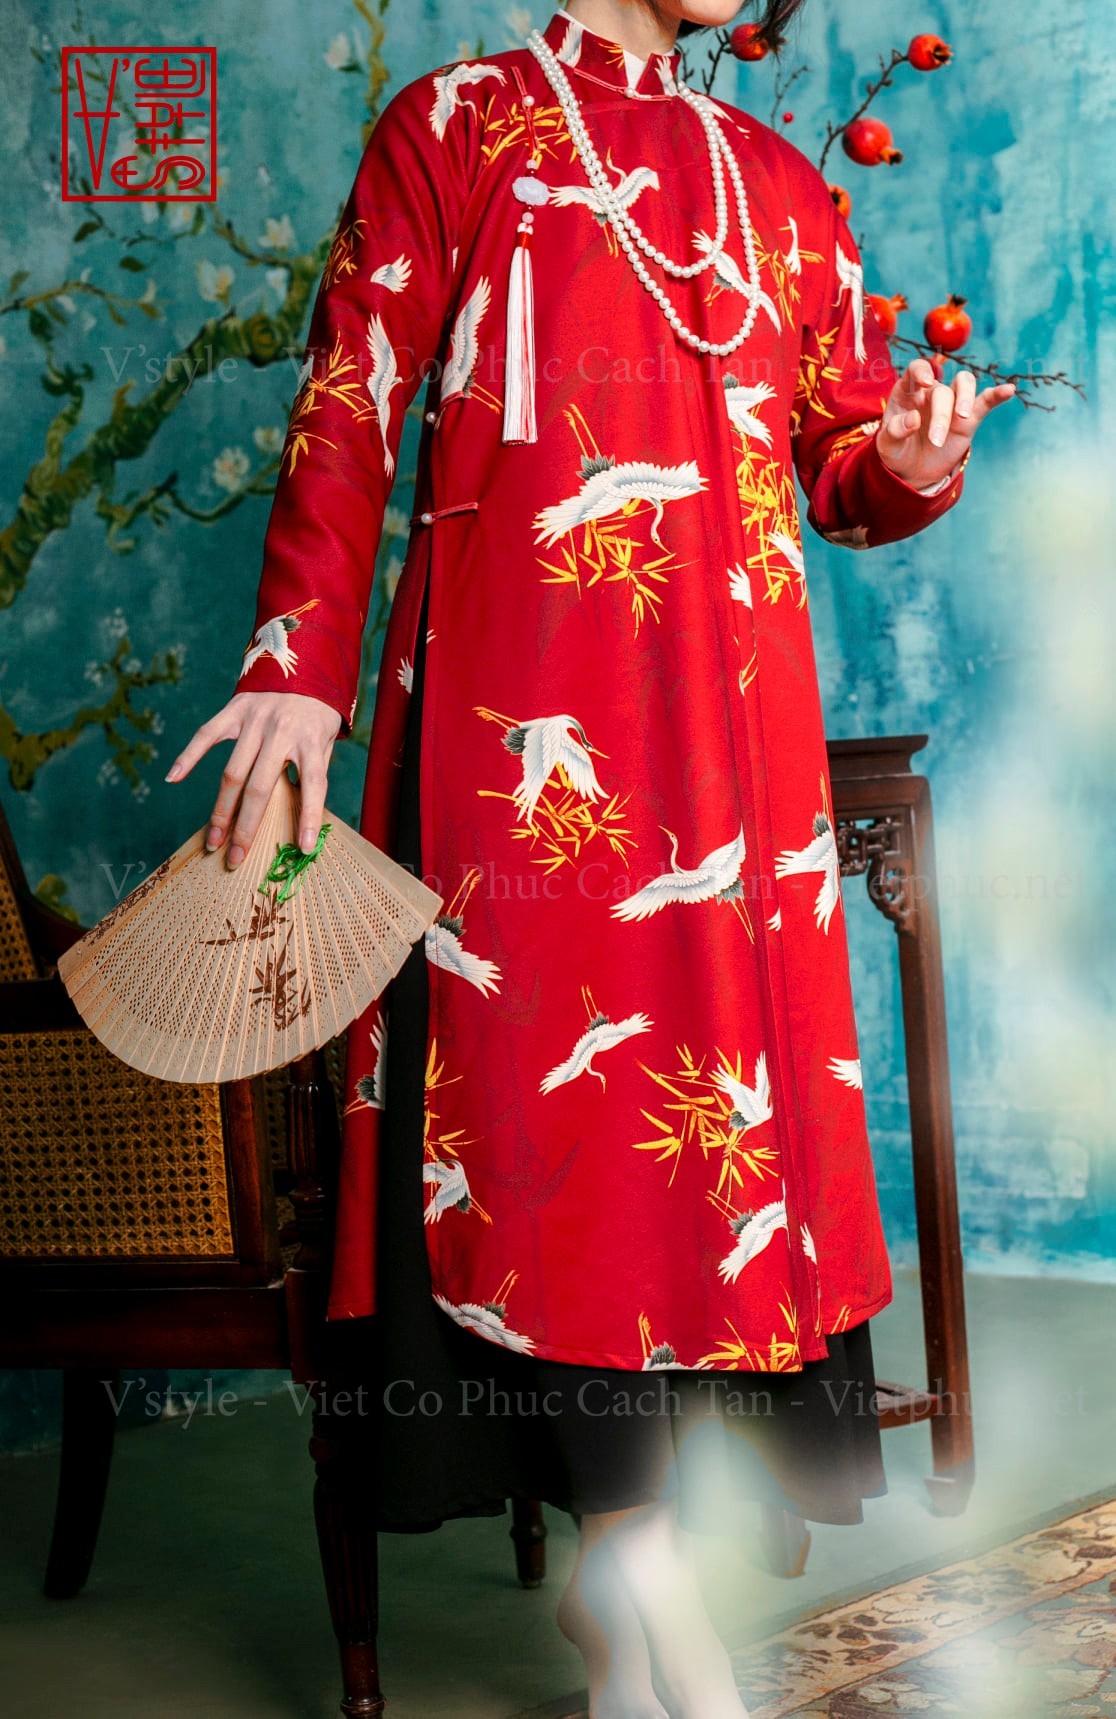 Vietnamese Don Ancient Costumes to Welcome Lunar New Year